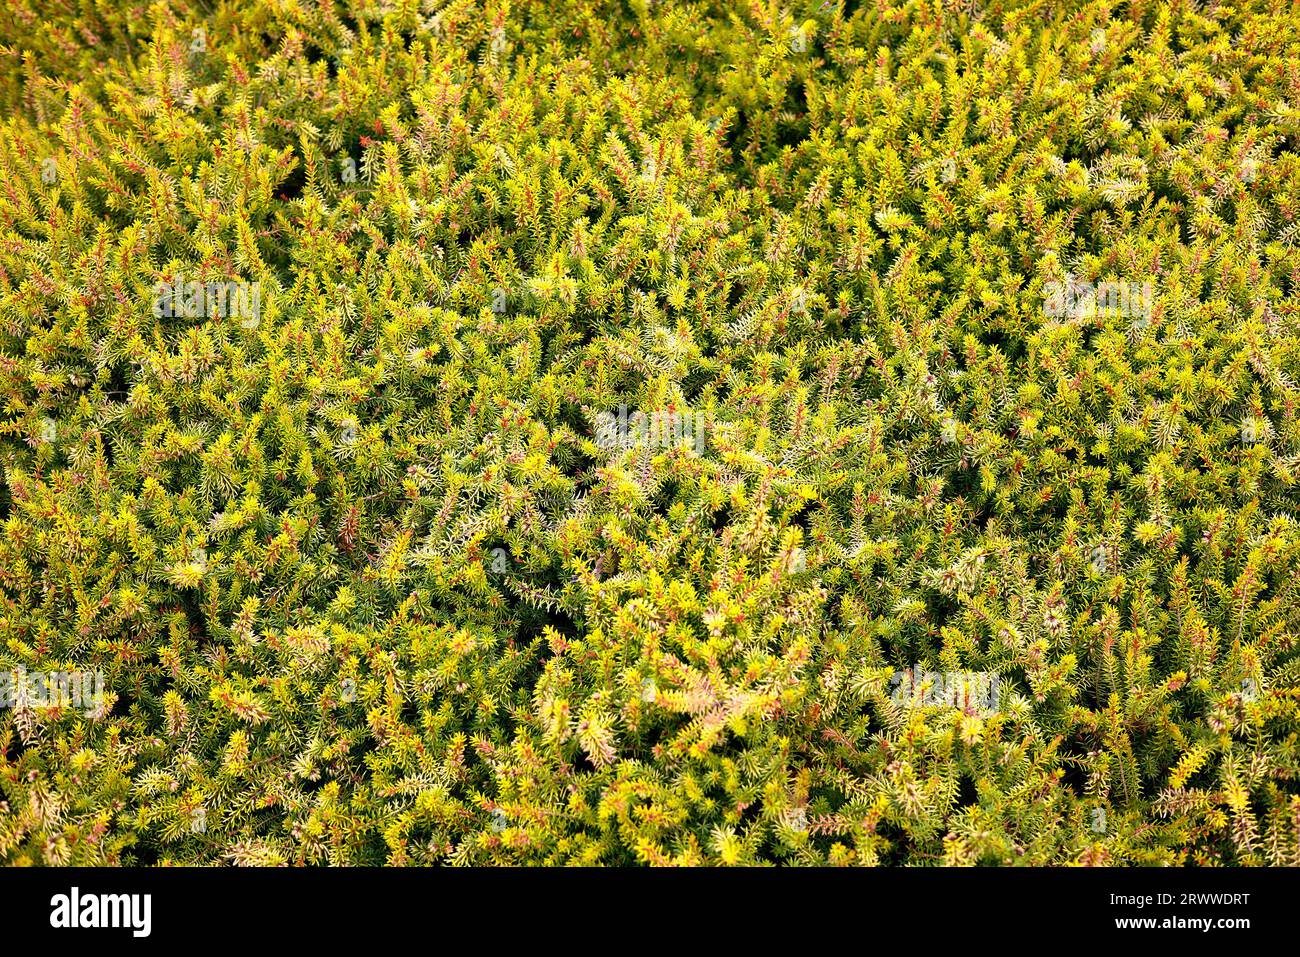 Closeup of the golden yellow foliage of the perennial hardy heather garden plant erica carnea f. aureifolia Bells extra special filling the frame. Stock Photo